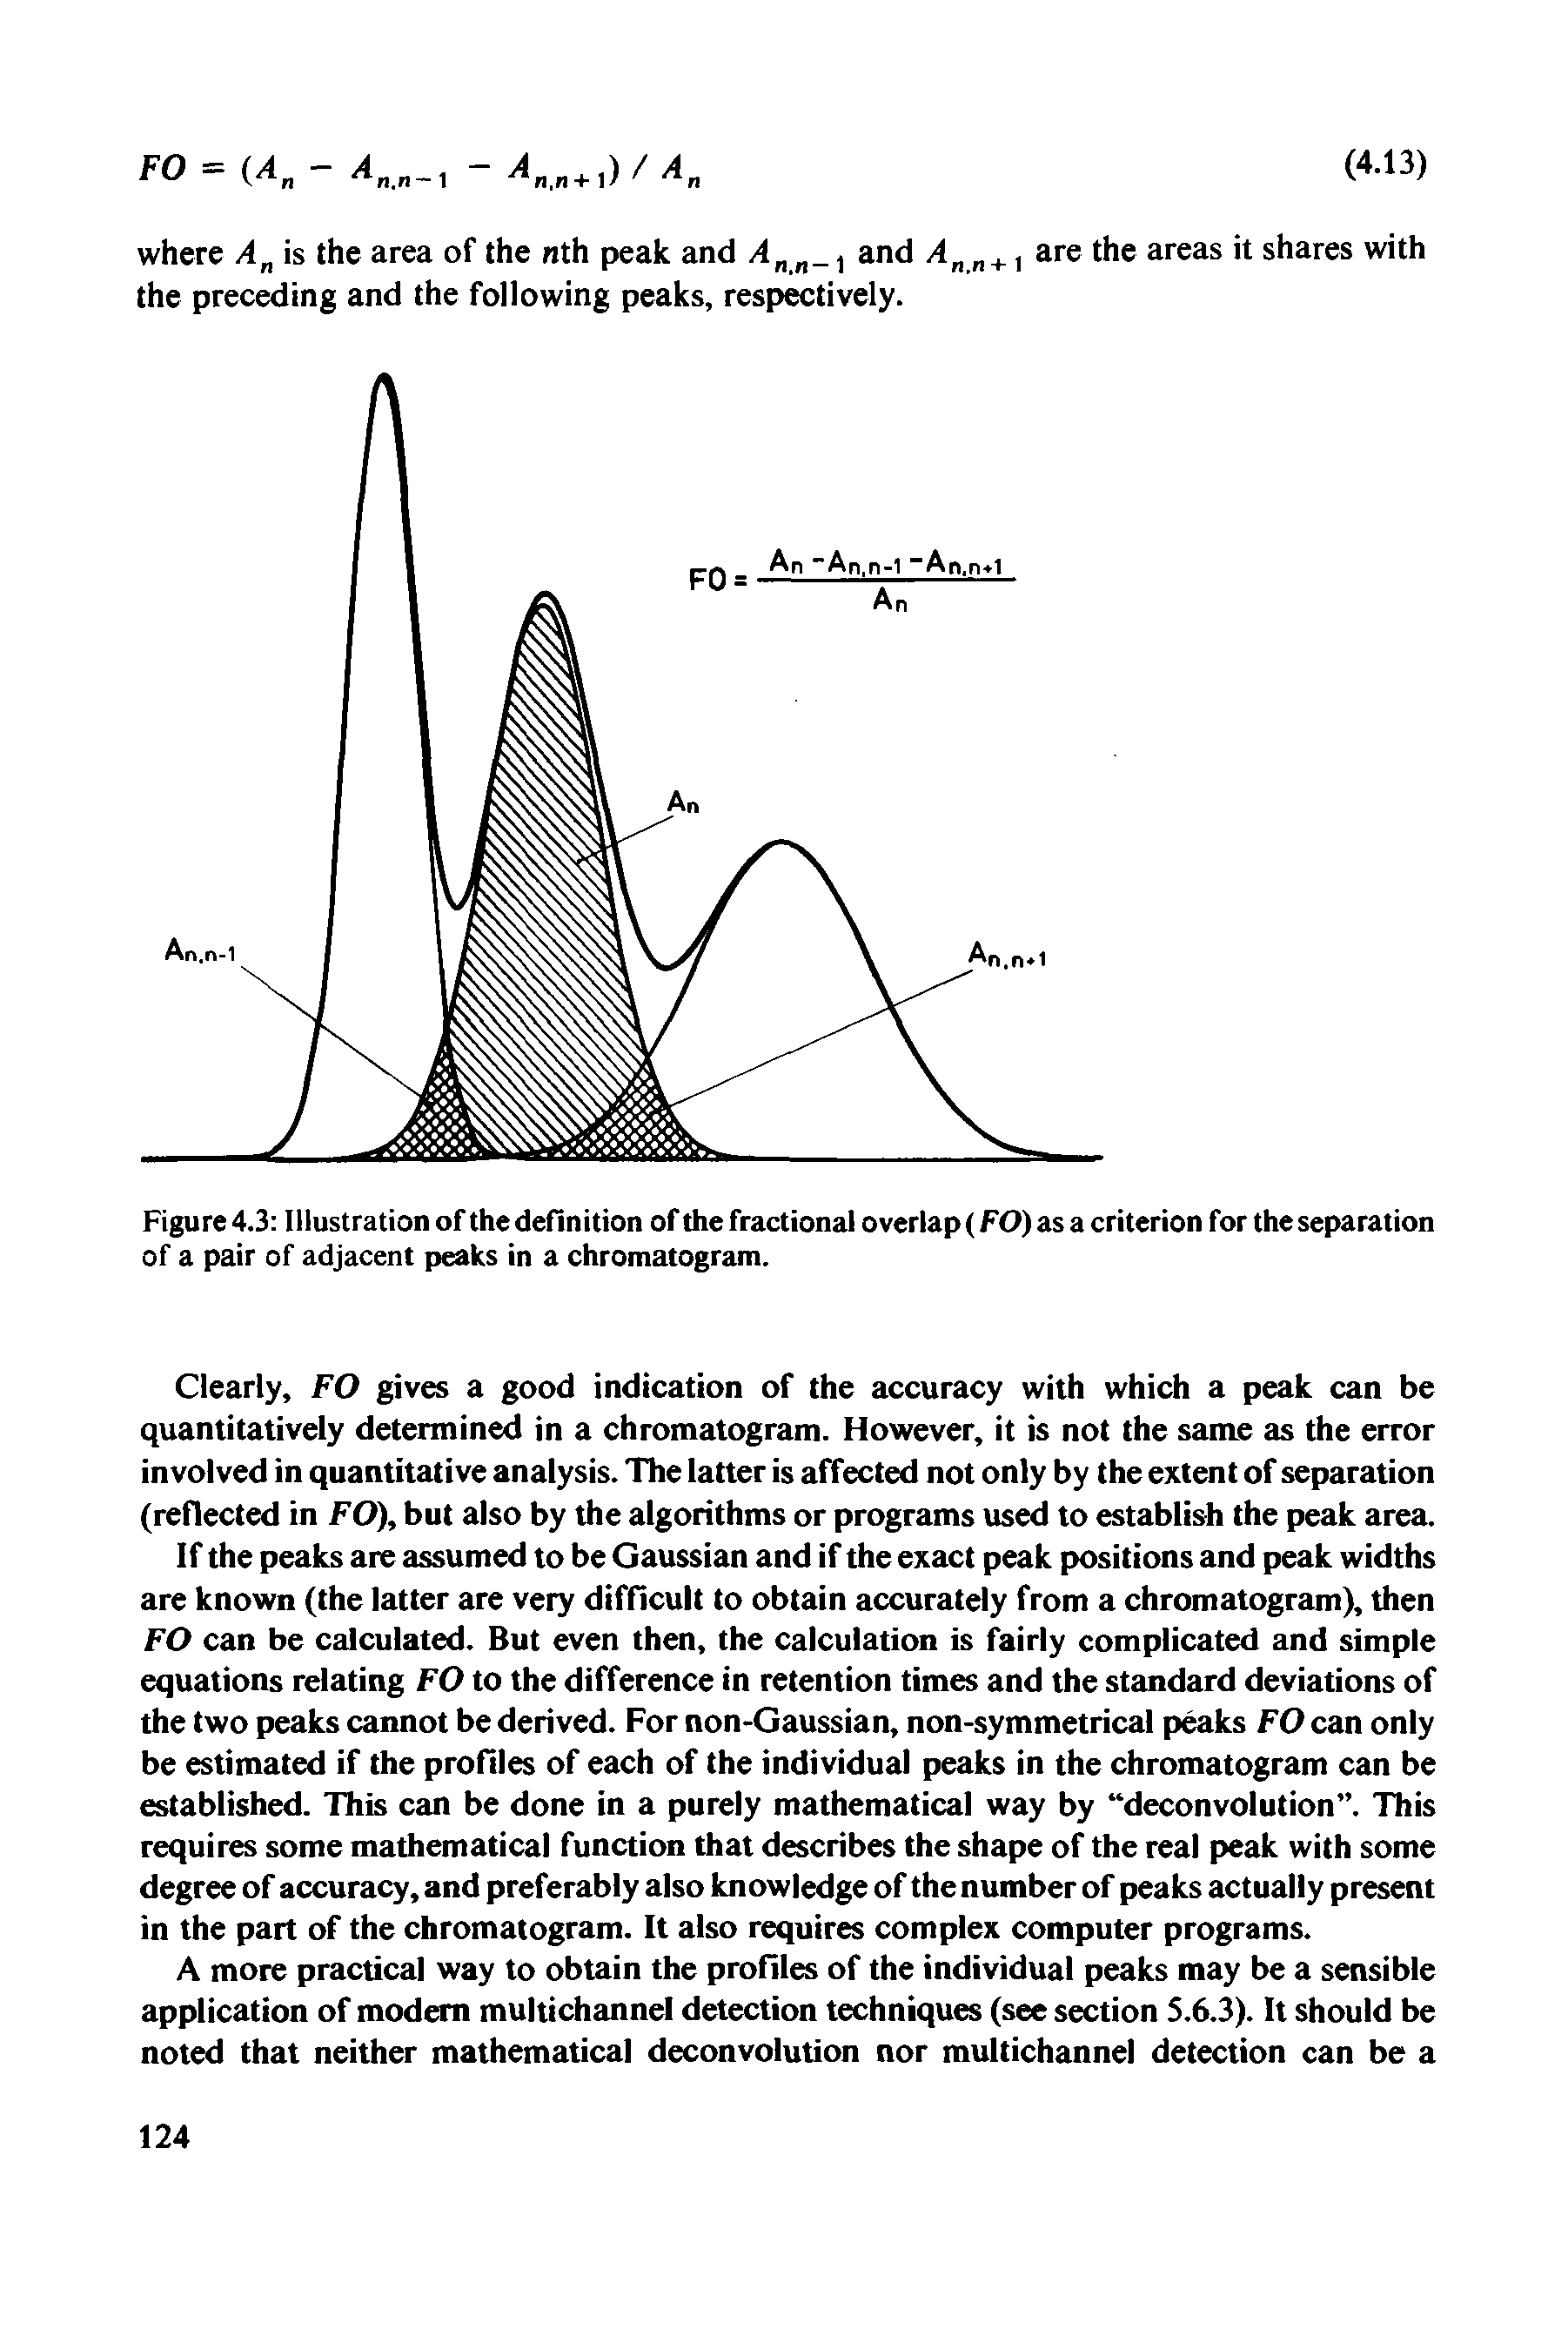 Figure 4.3 Illustration of the definition of the fractional overlap (FO) as a criterion for the separation of a pair of adjacent peaks in a chromatogram.